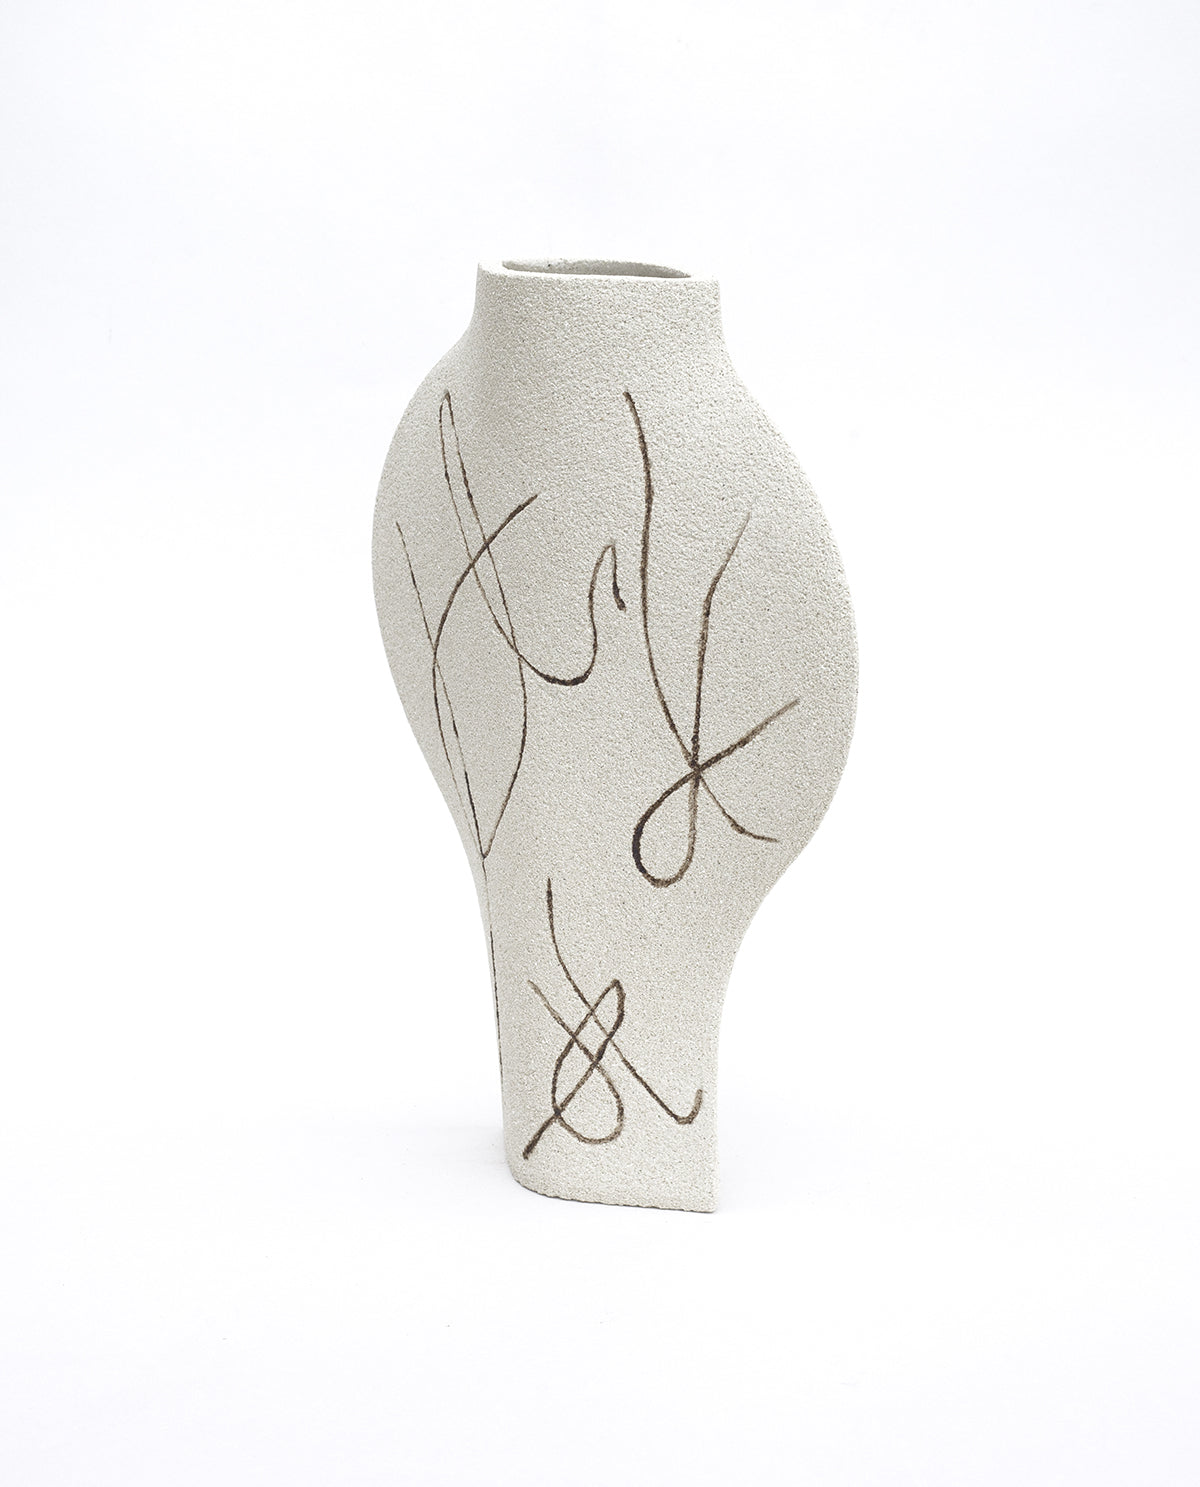 Hand-painted abstract vase by INI CERAMIQUE with carved patterns and textured finish